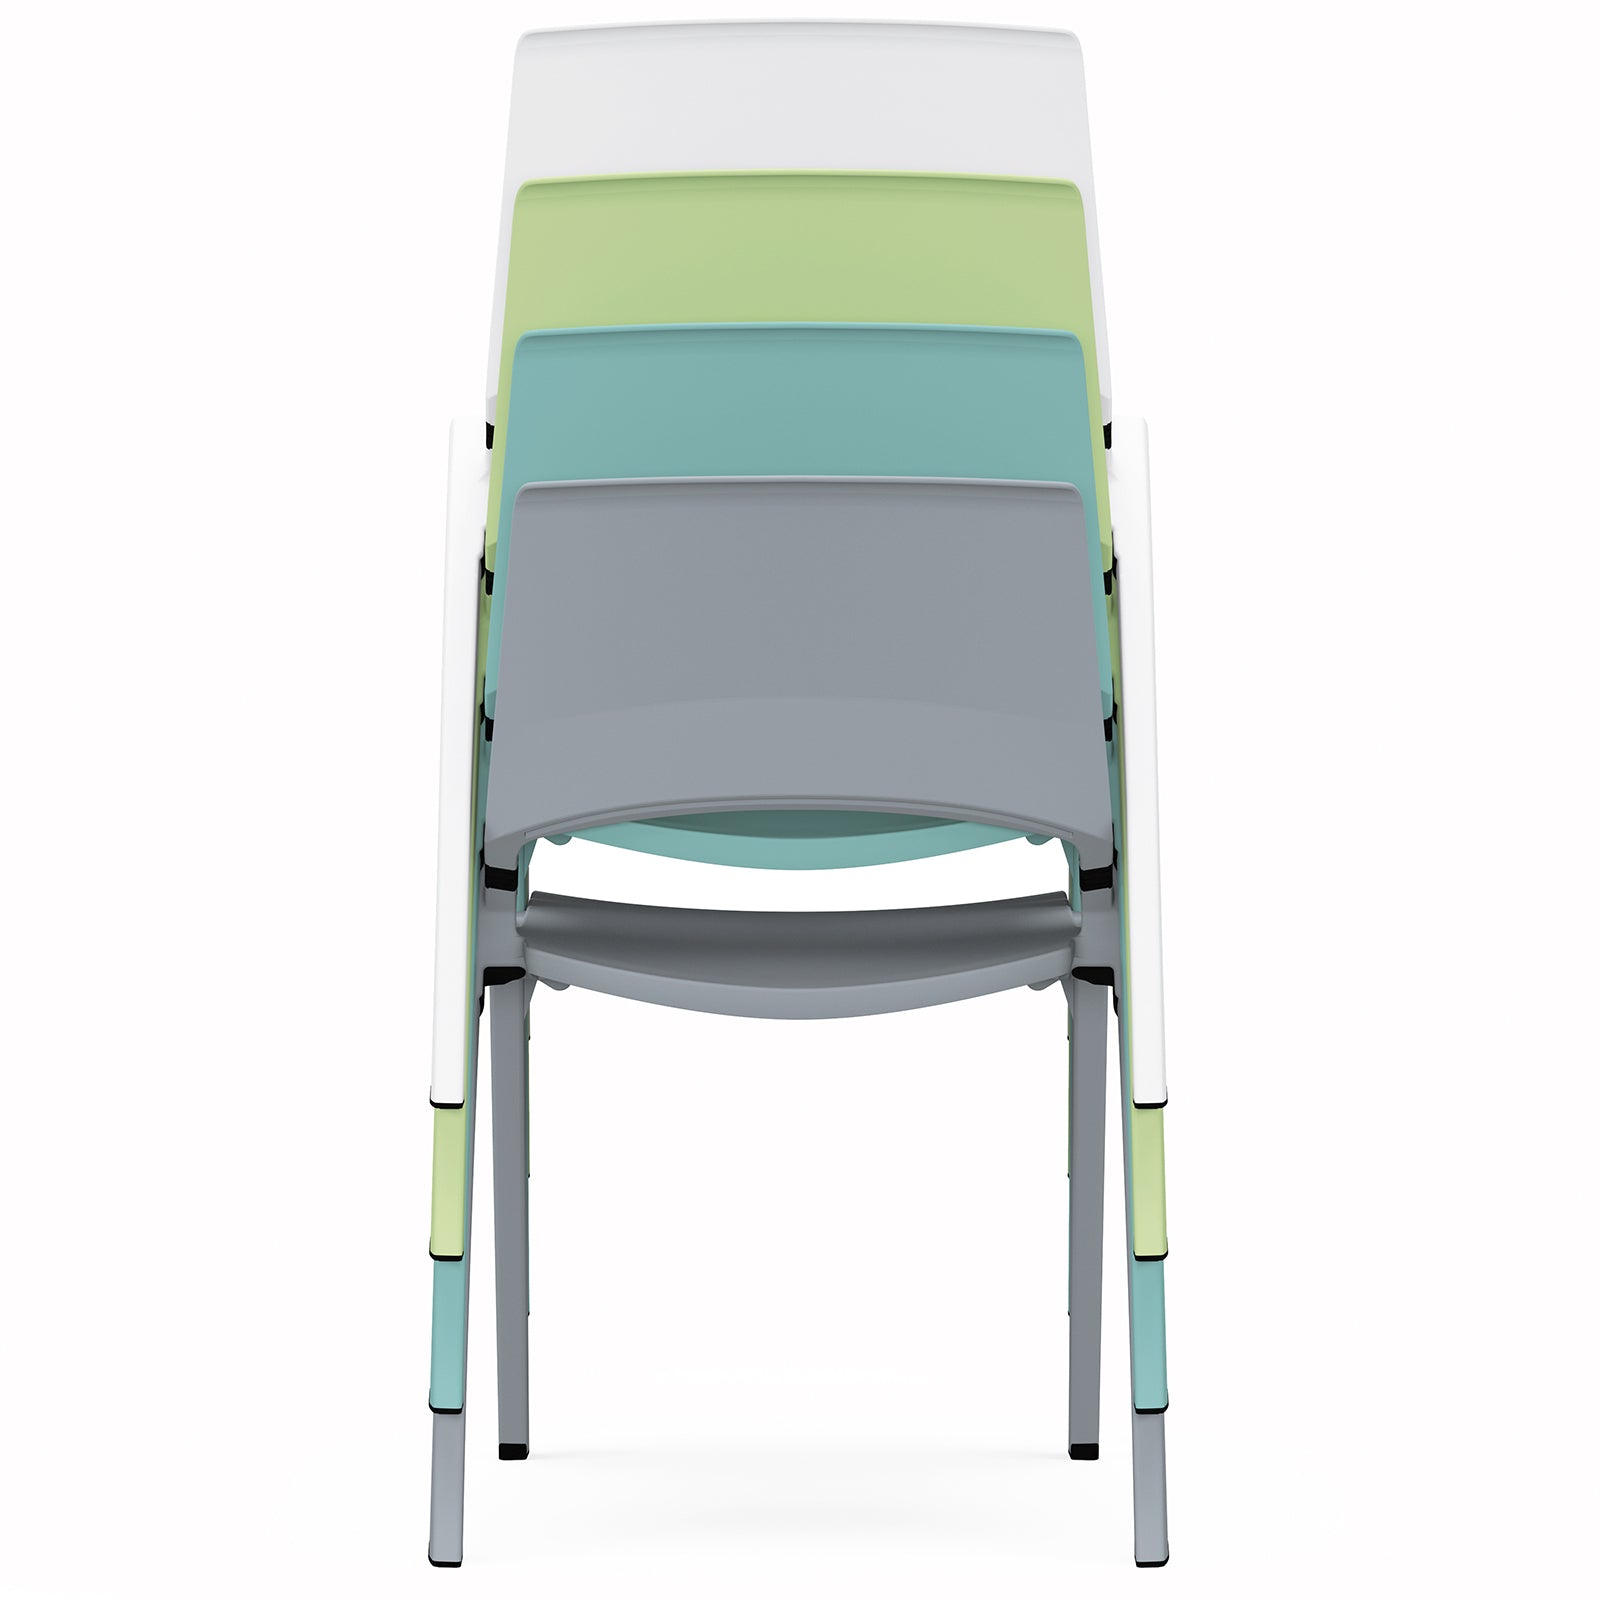 VOFFOV® Conference Chair for Schools, Collages, Office